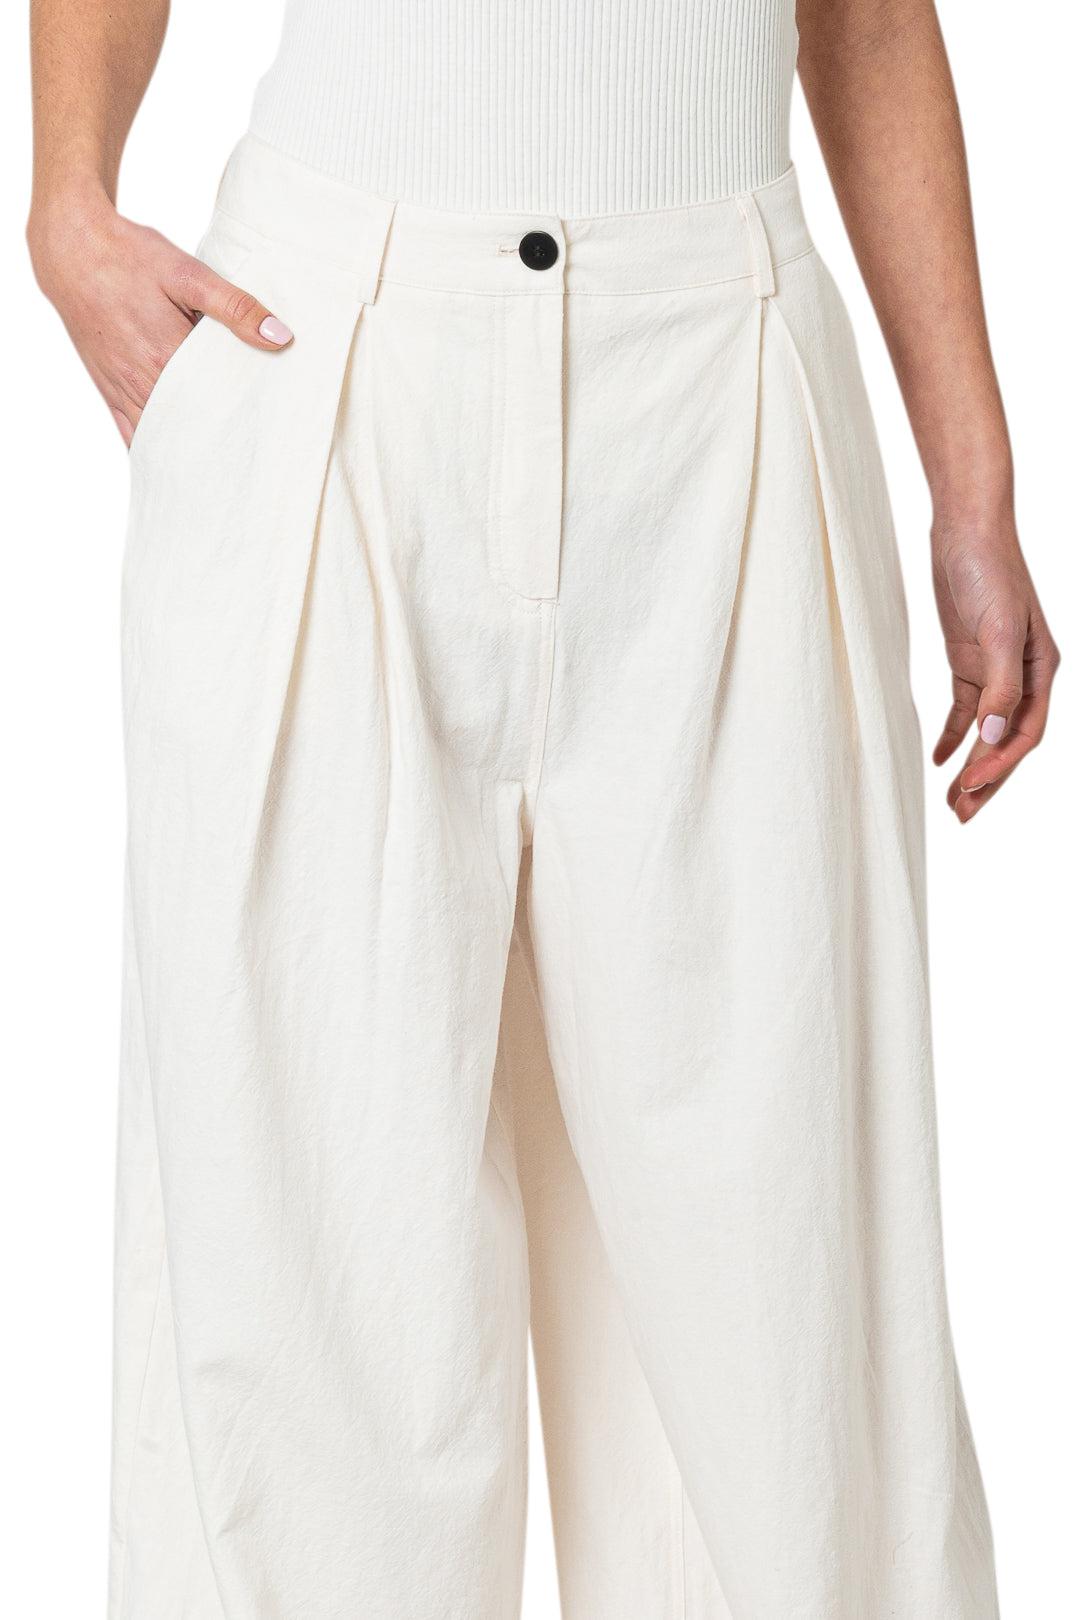 The Garment-Tailored linen full-cut trousers-dgallerystore